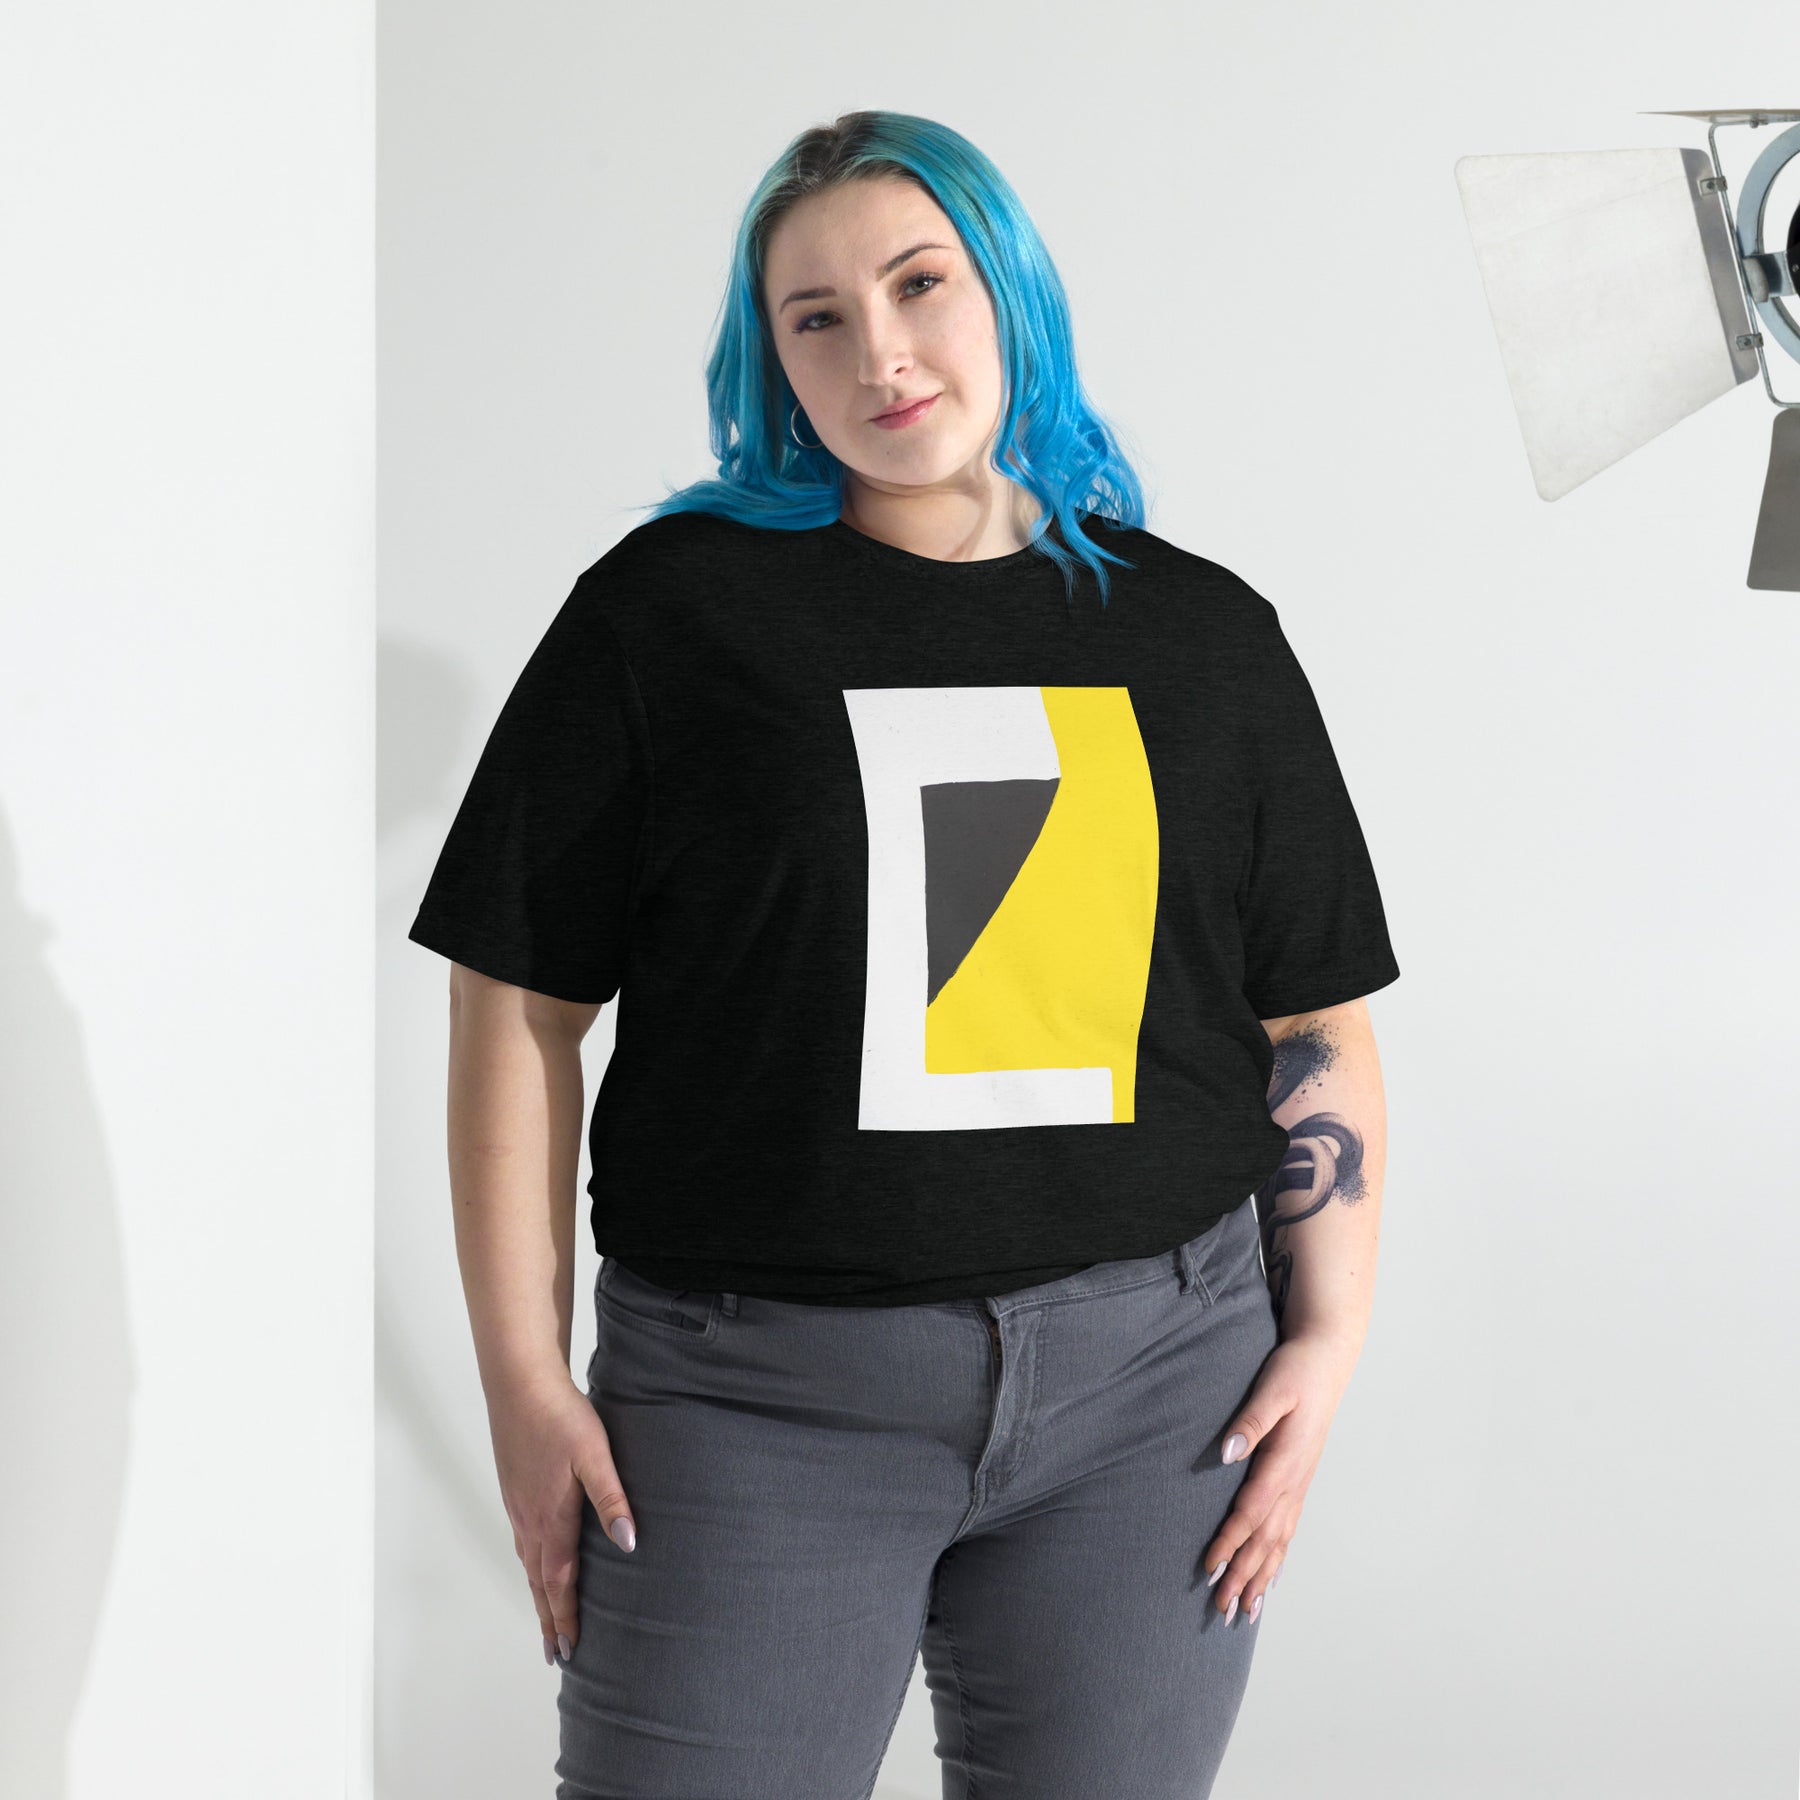 Abstract Art colours White, Black and Yellow | Unisex T-shirt